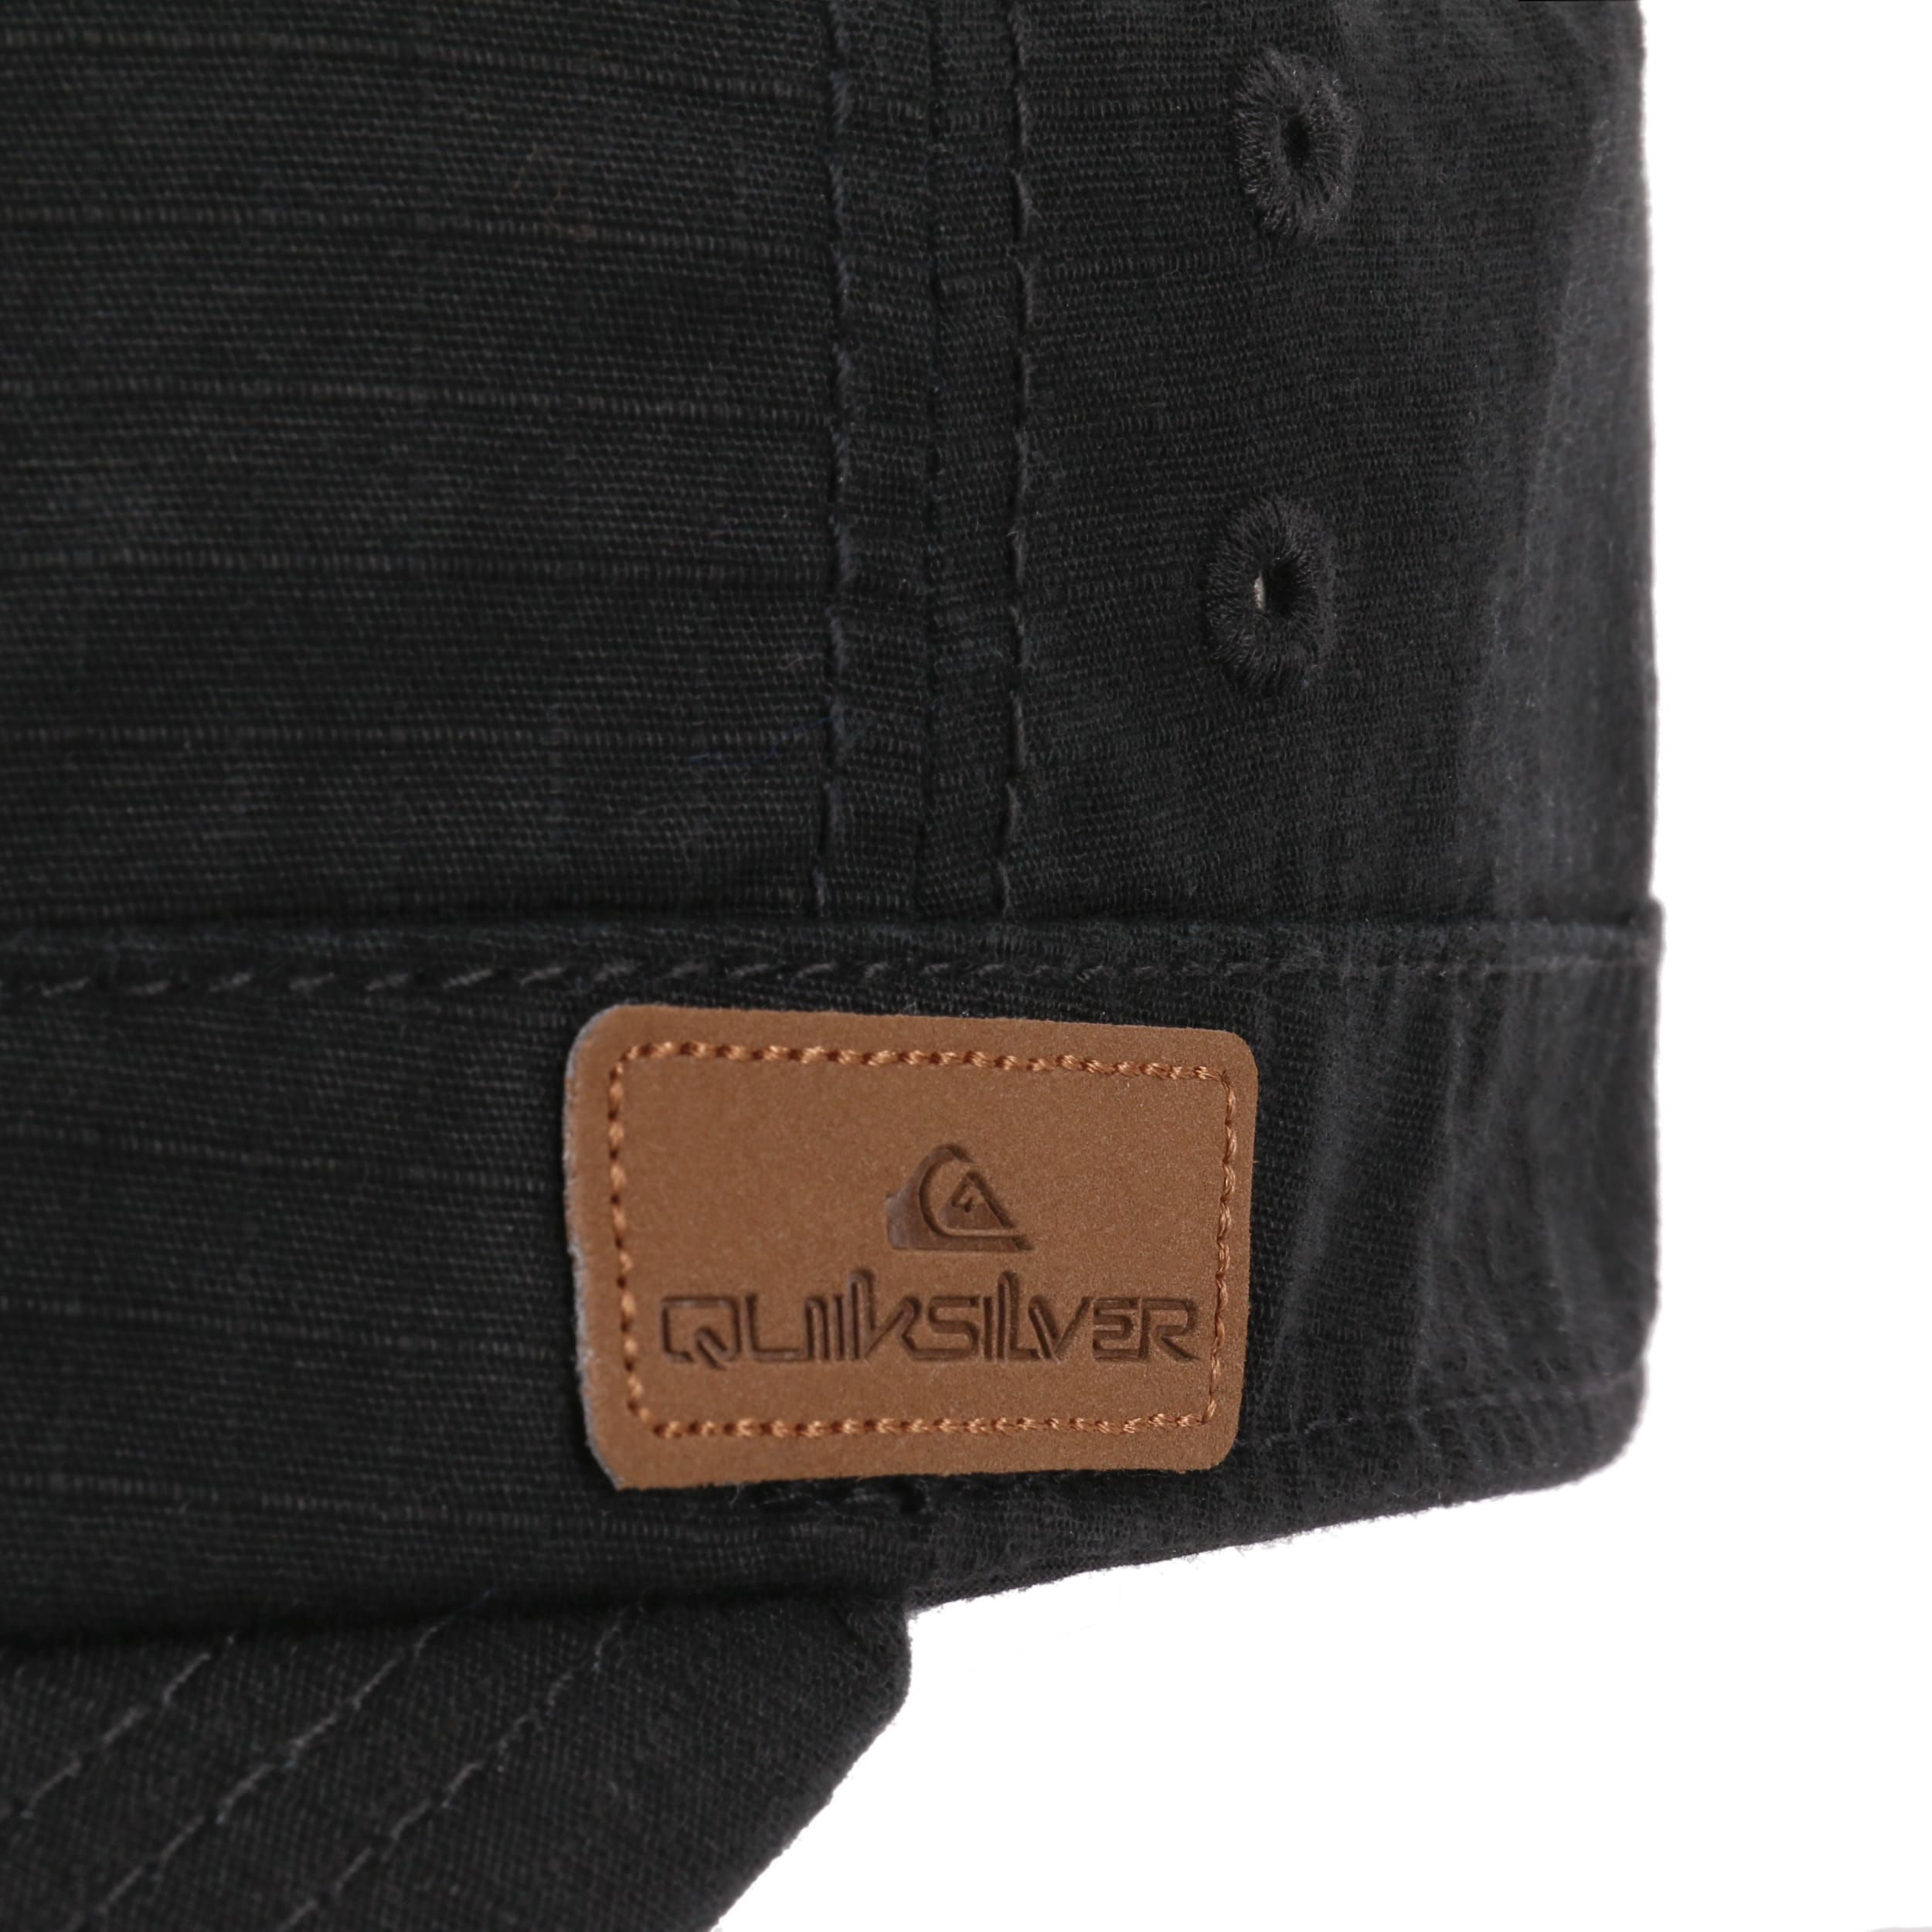 Quiksilver Cap 2 32,95 by € Army - Renegade